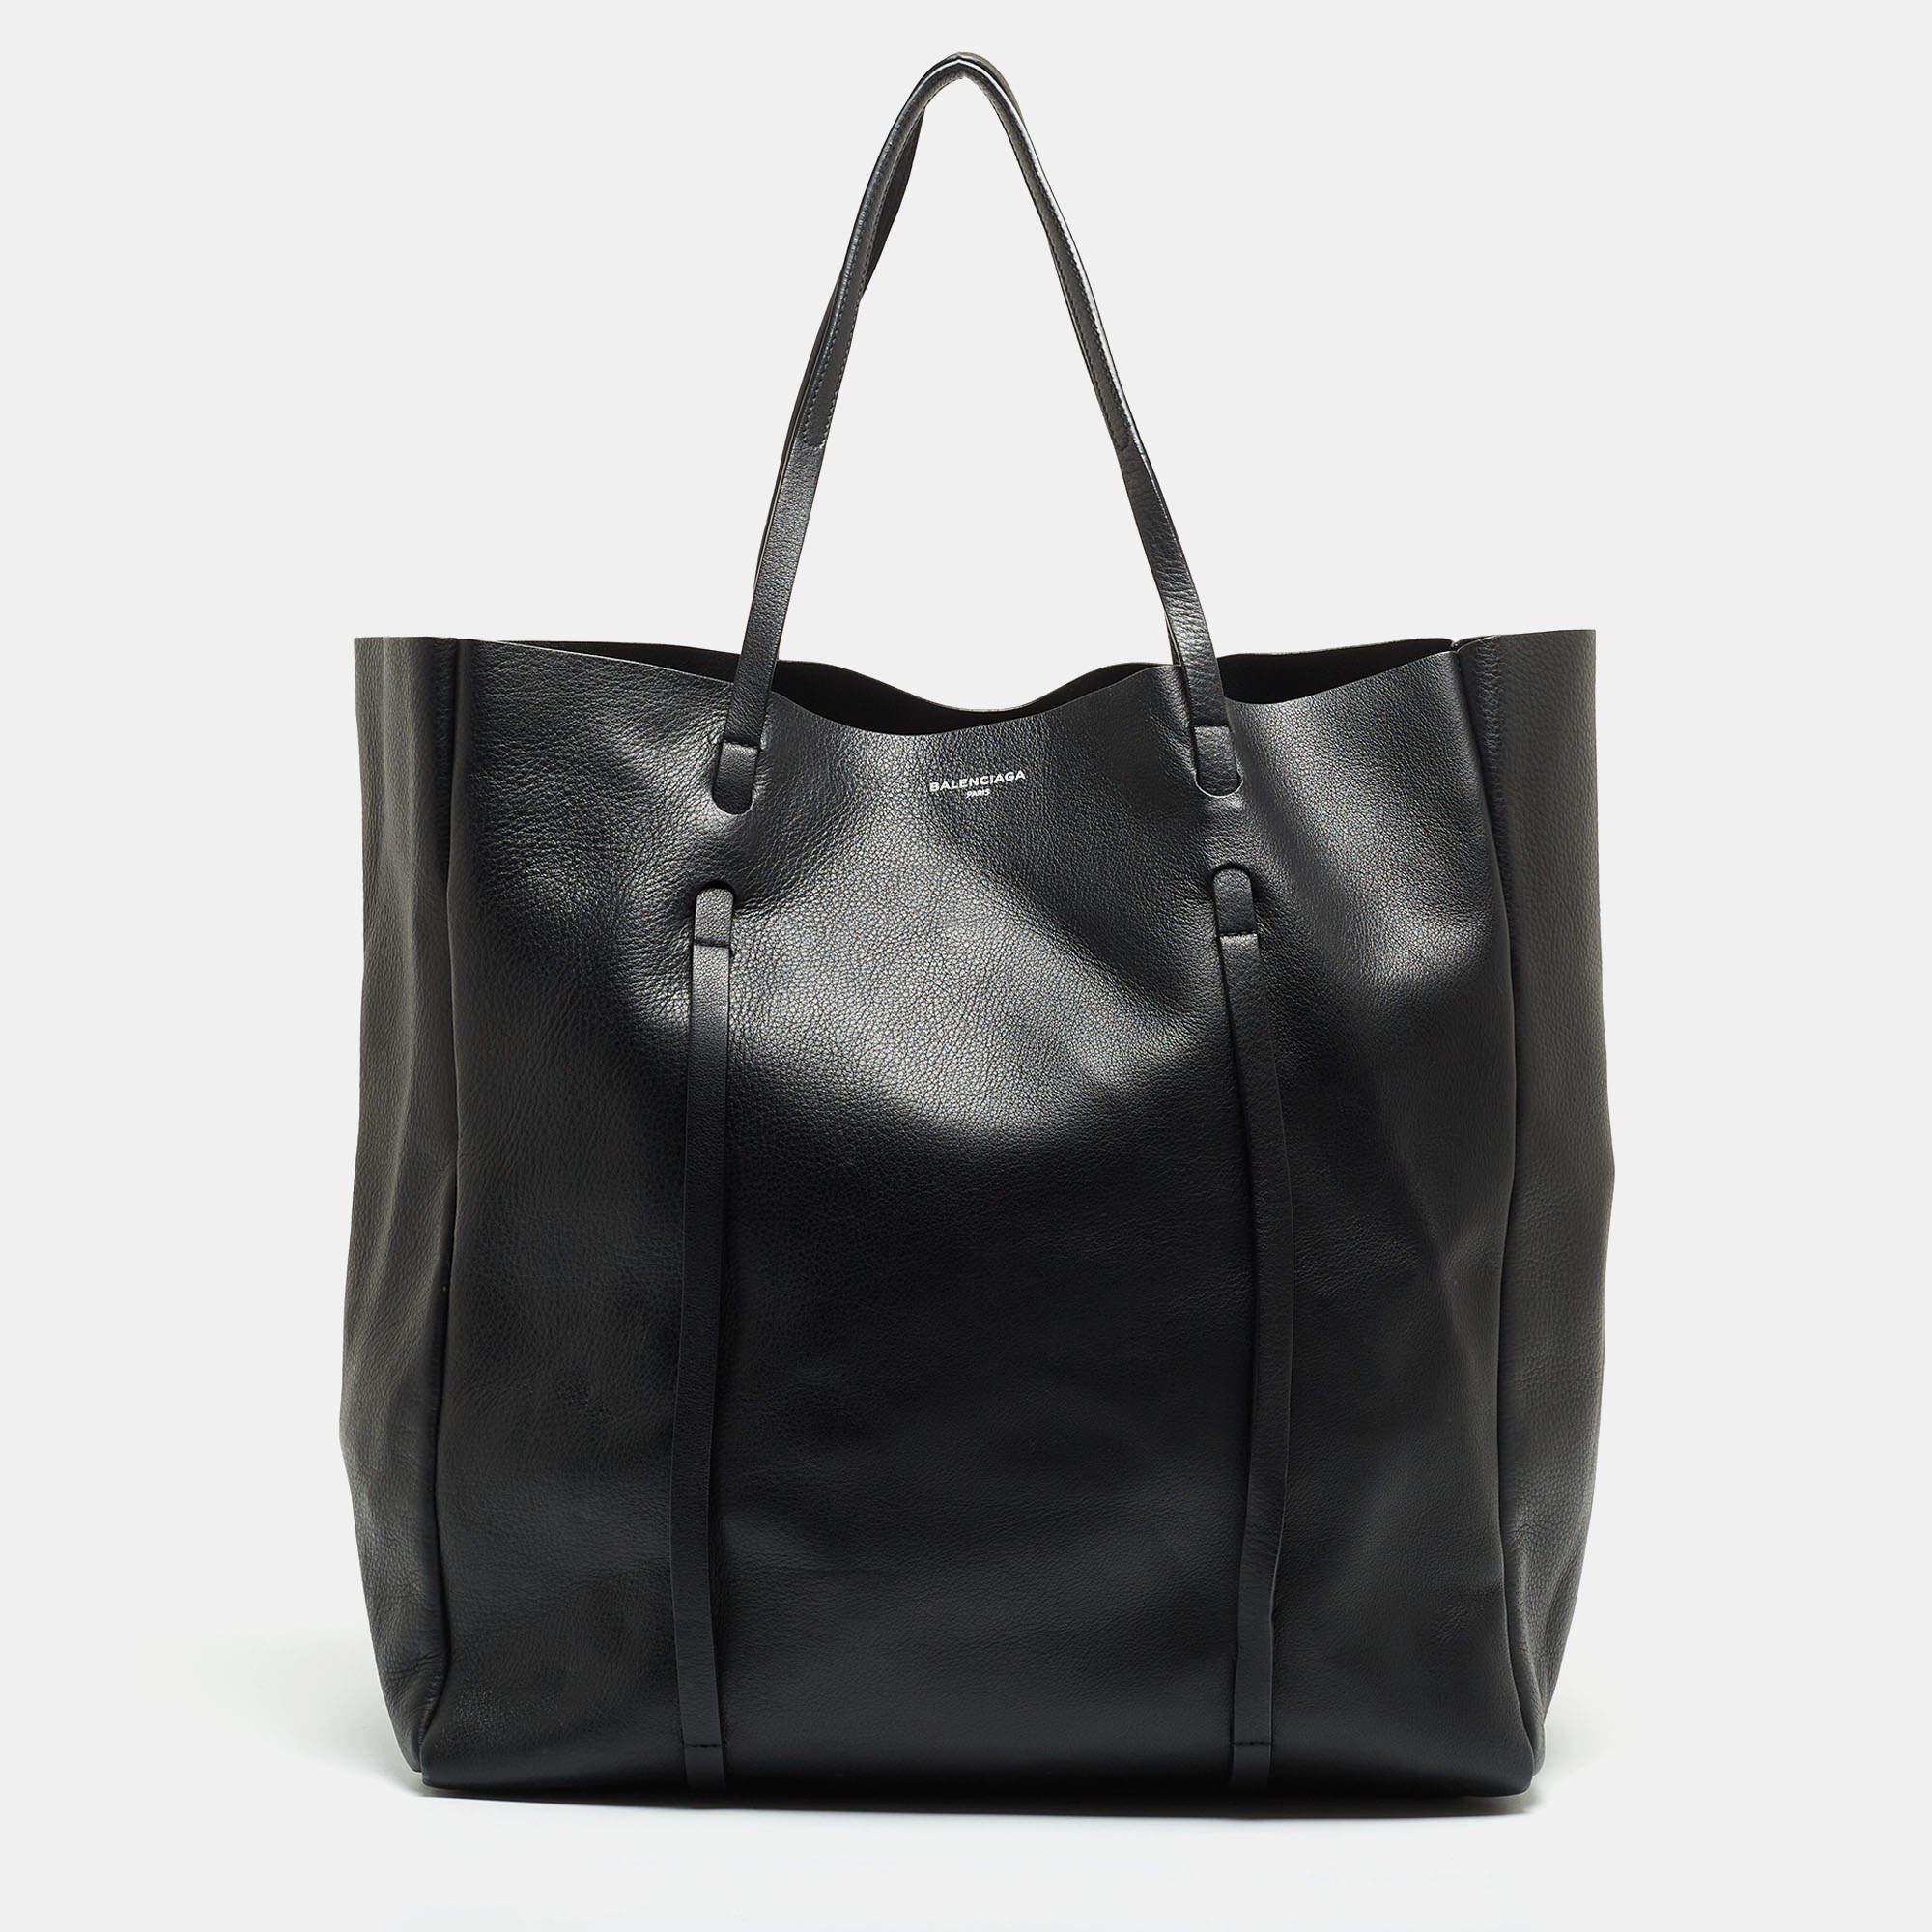 This Balenciaga black tote for women is super classy and functional, perfect for everyday use. We like the simple details and its high-quality finish.

Includes: Info Booklet, Extra Pouch, Mirror

